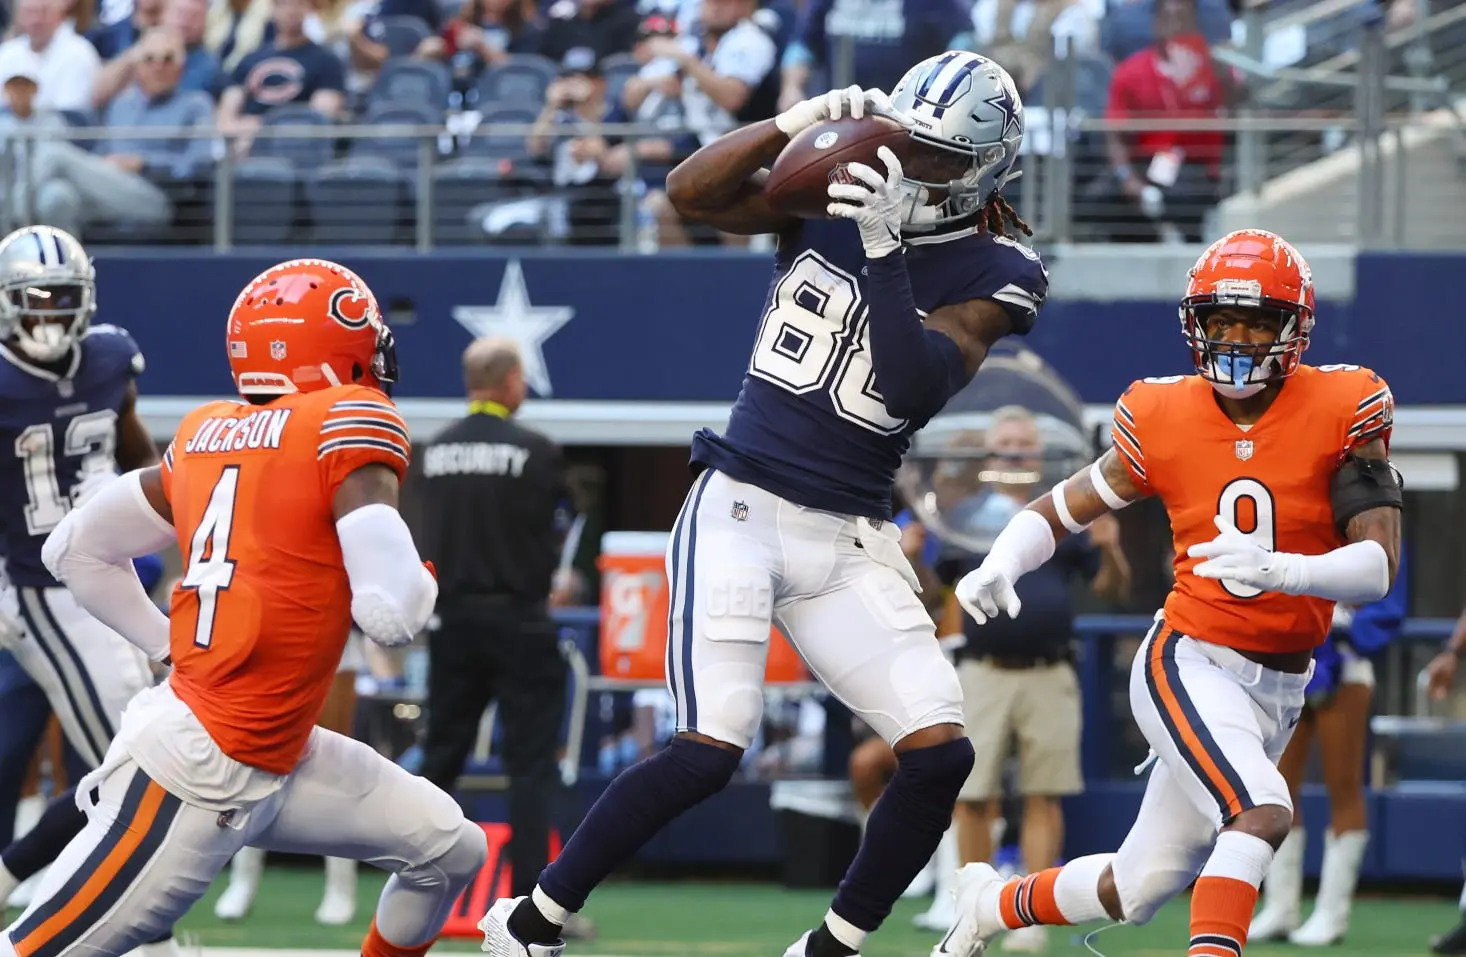 Bears' defense gets carved up in 49-29 loss to Cowboys | Flipboard